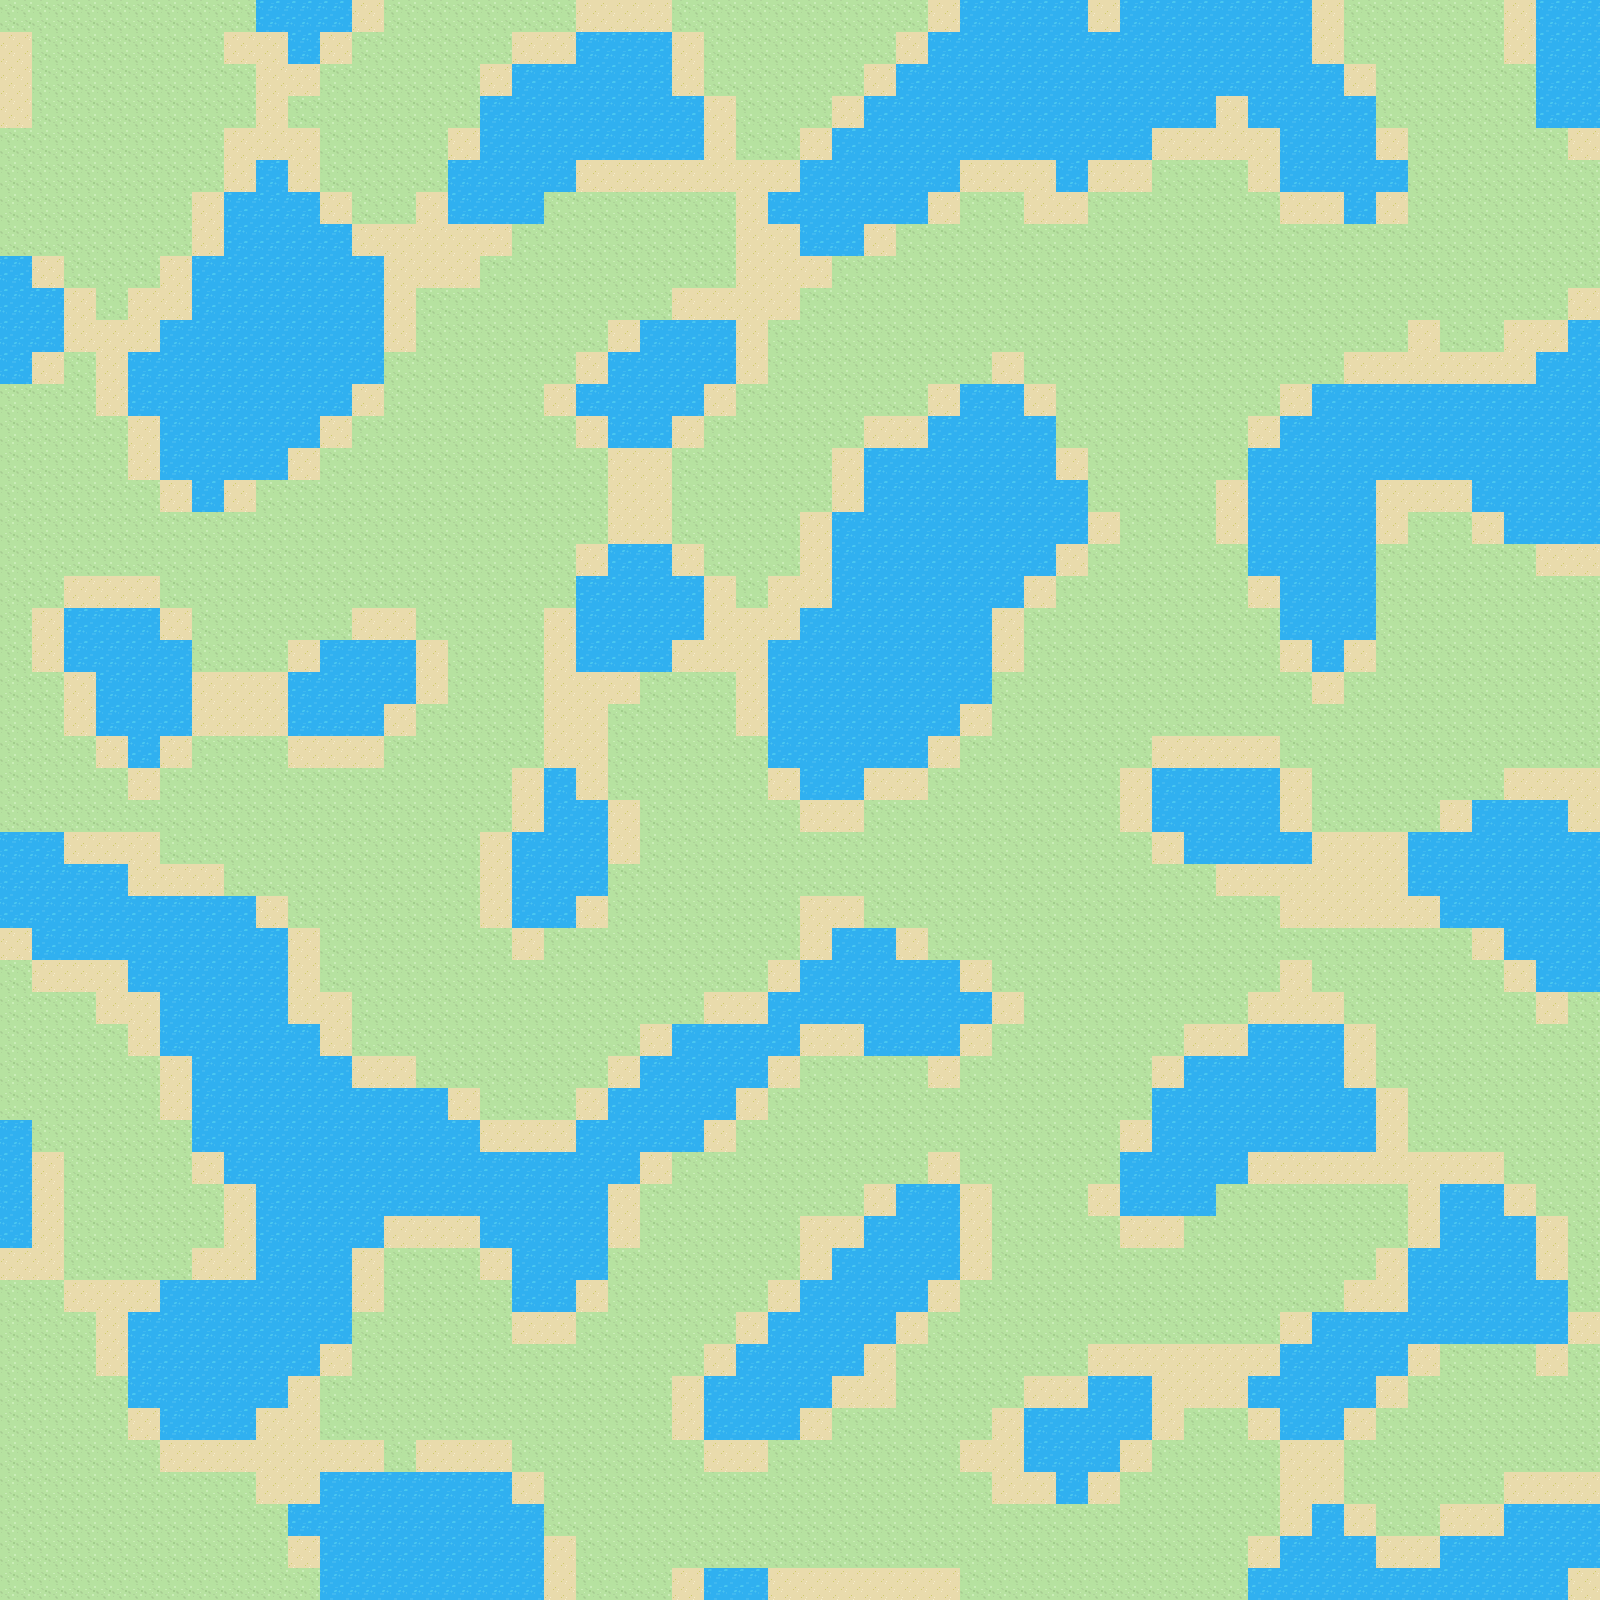 Generating a Procedural 2D Map in C#: Part 1 - The Attempt